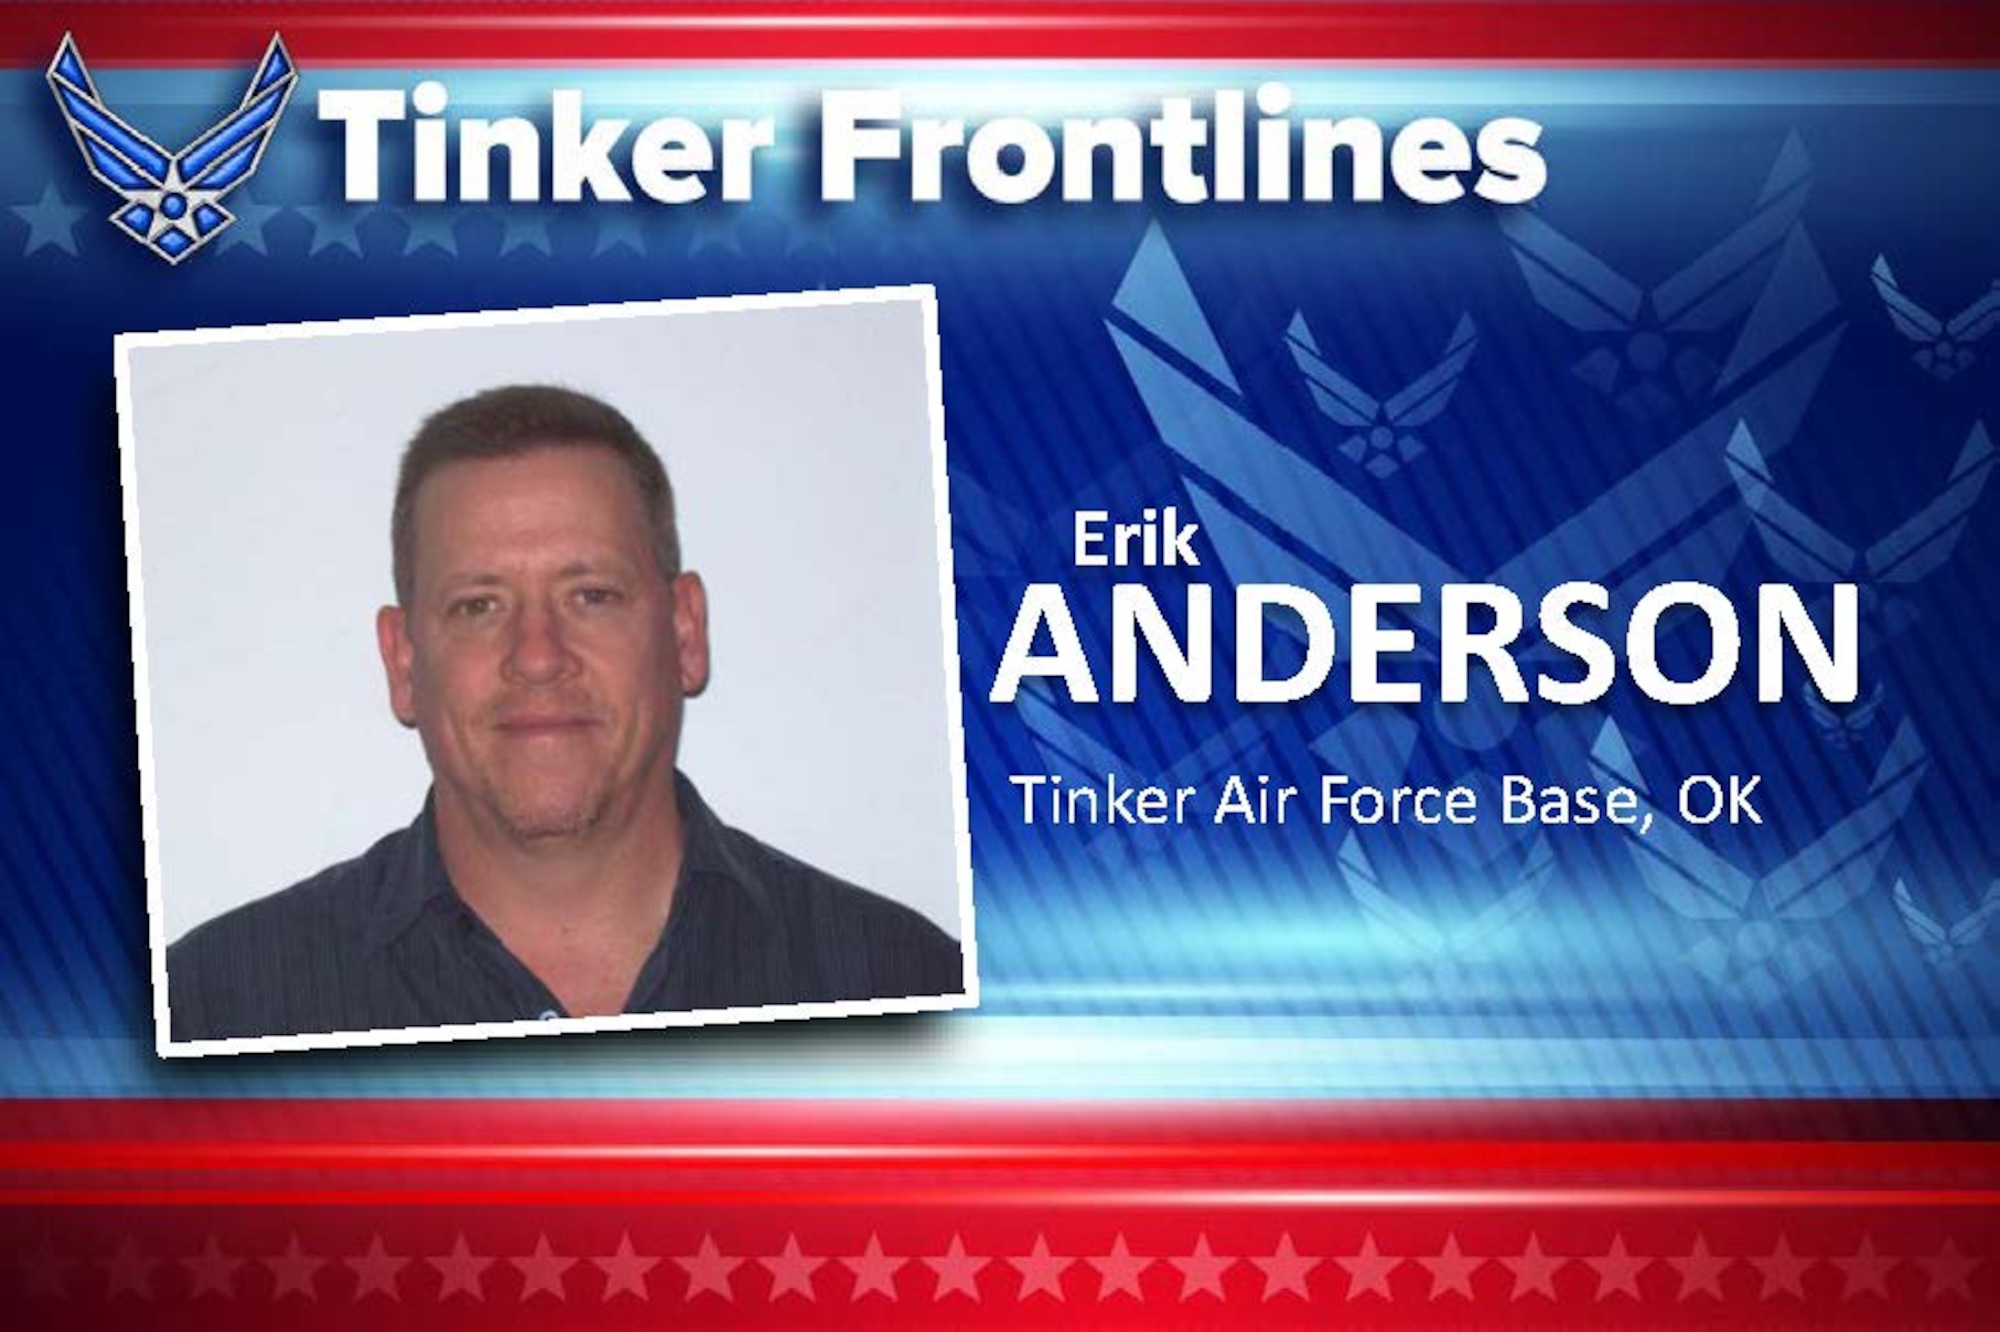 Erik K. Anderson is a logistics planner in the 72nd Logistics Readiness Squadron. He spent 24 years in the Air Force and has been a member of civil service for 10 years.